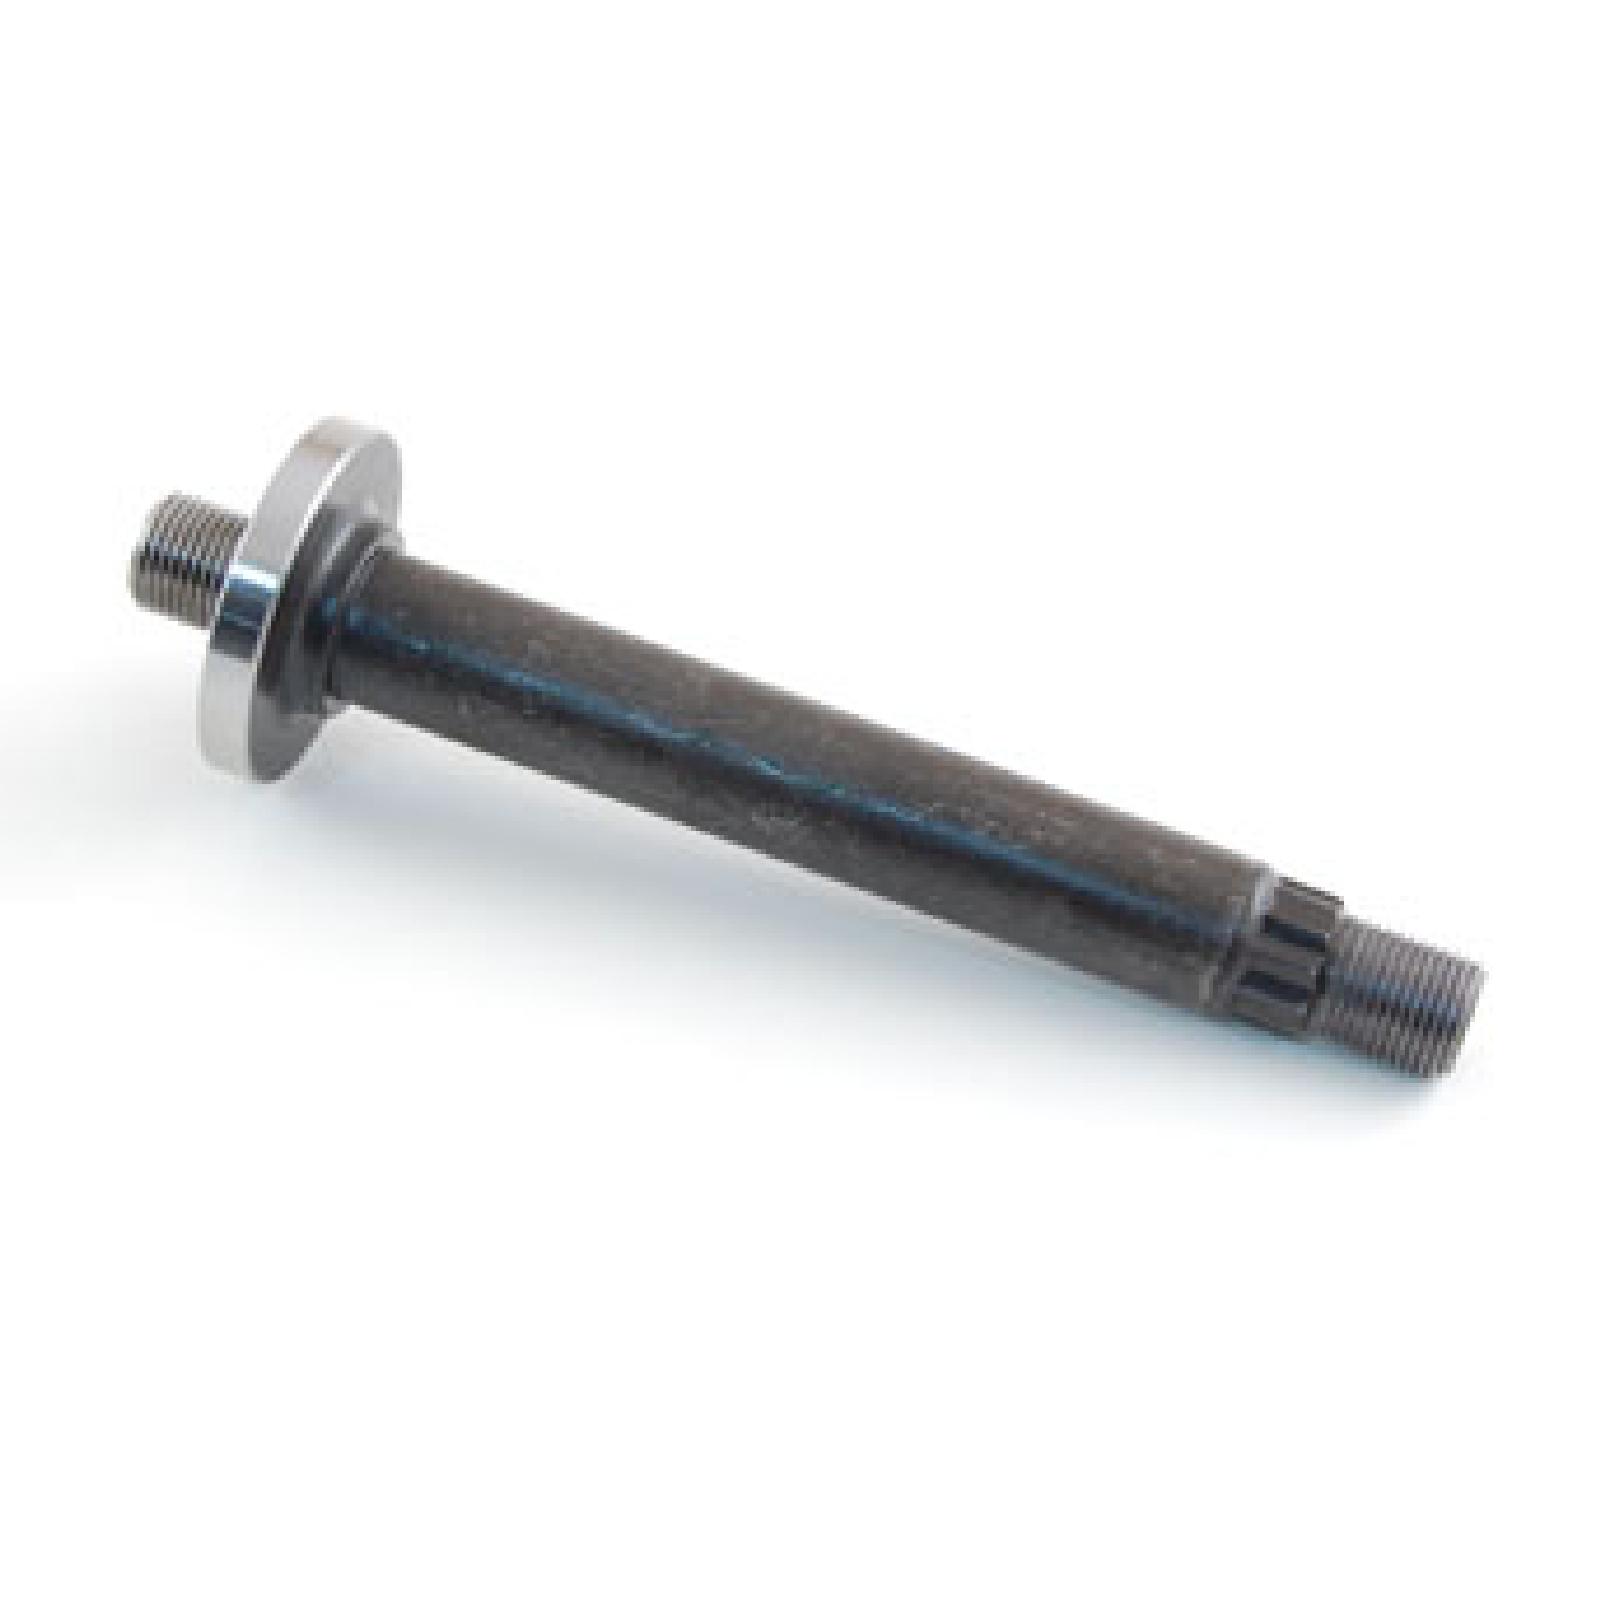 SHAFT BLADE SPINDL part# 738-1186A by MTD